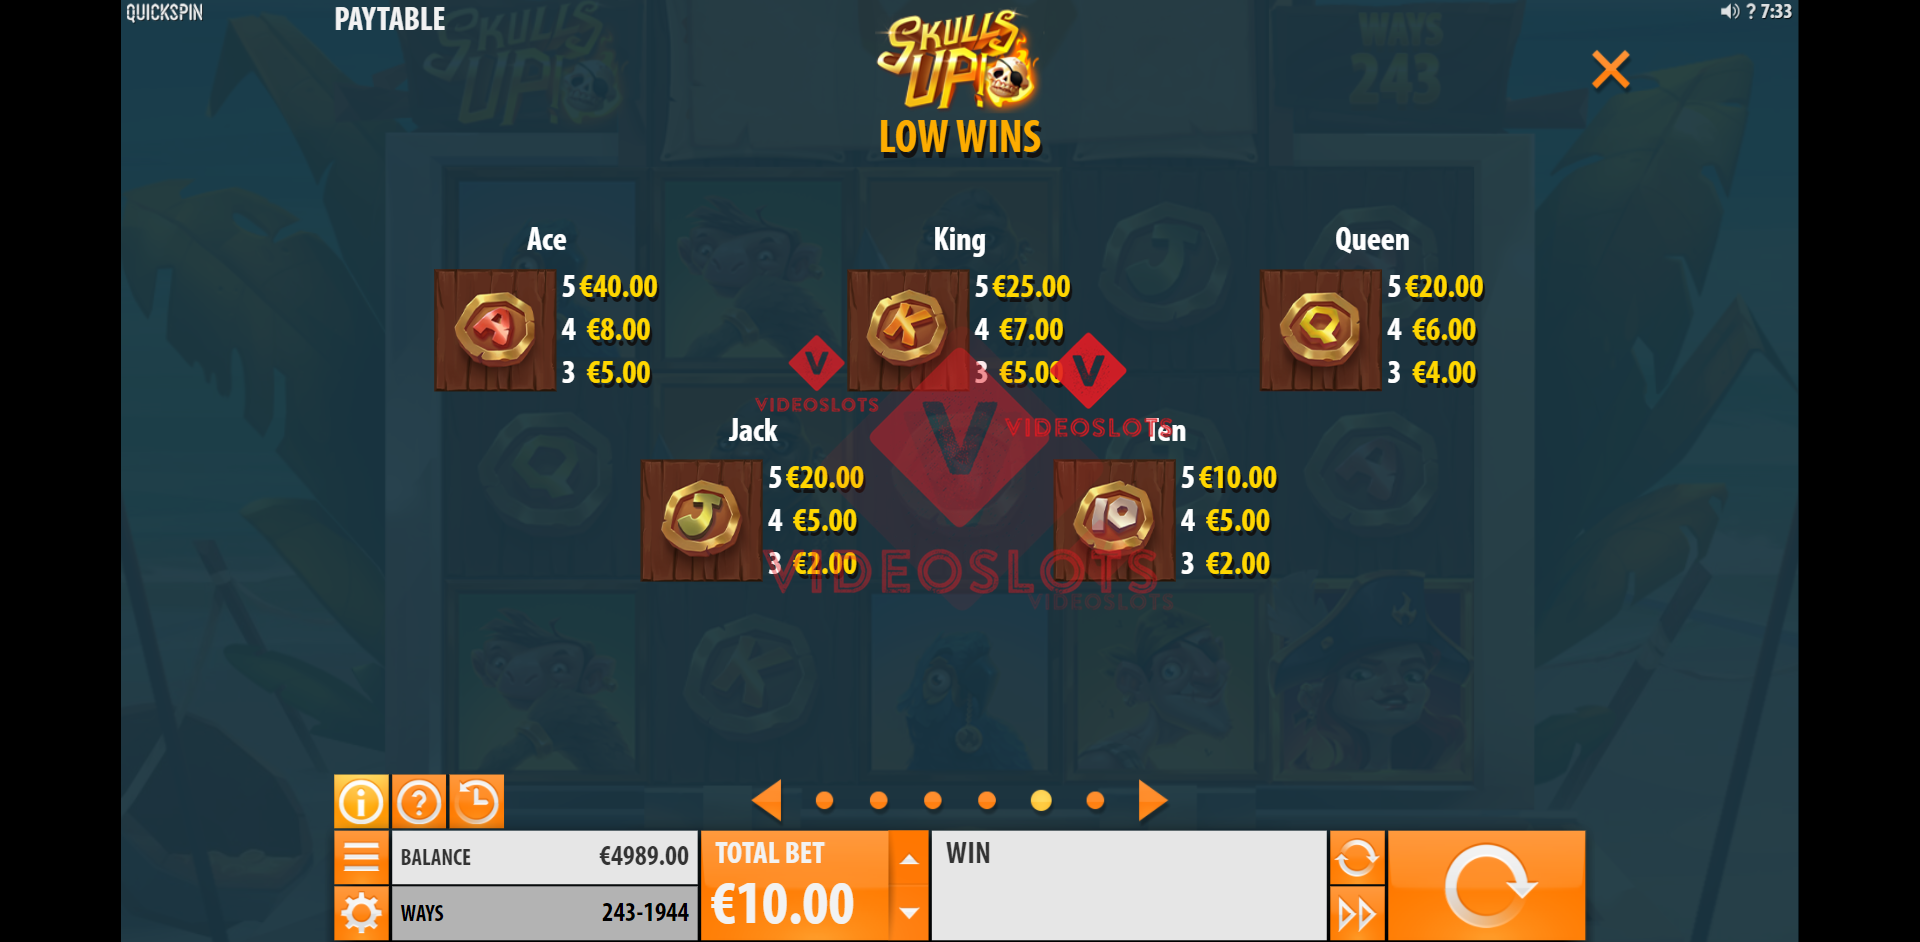 Pay Table and Game Info for Skulls Up slot from Quickspin